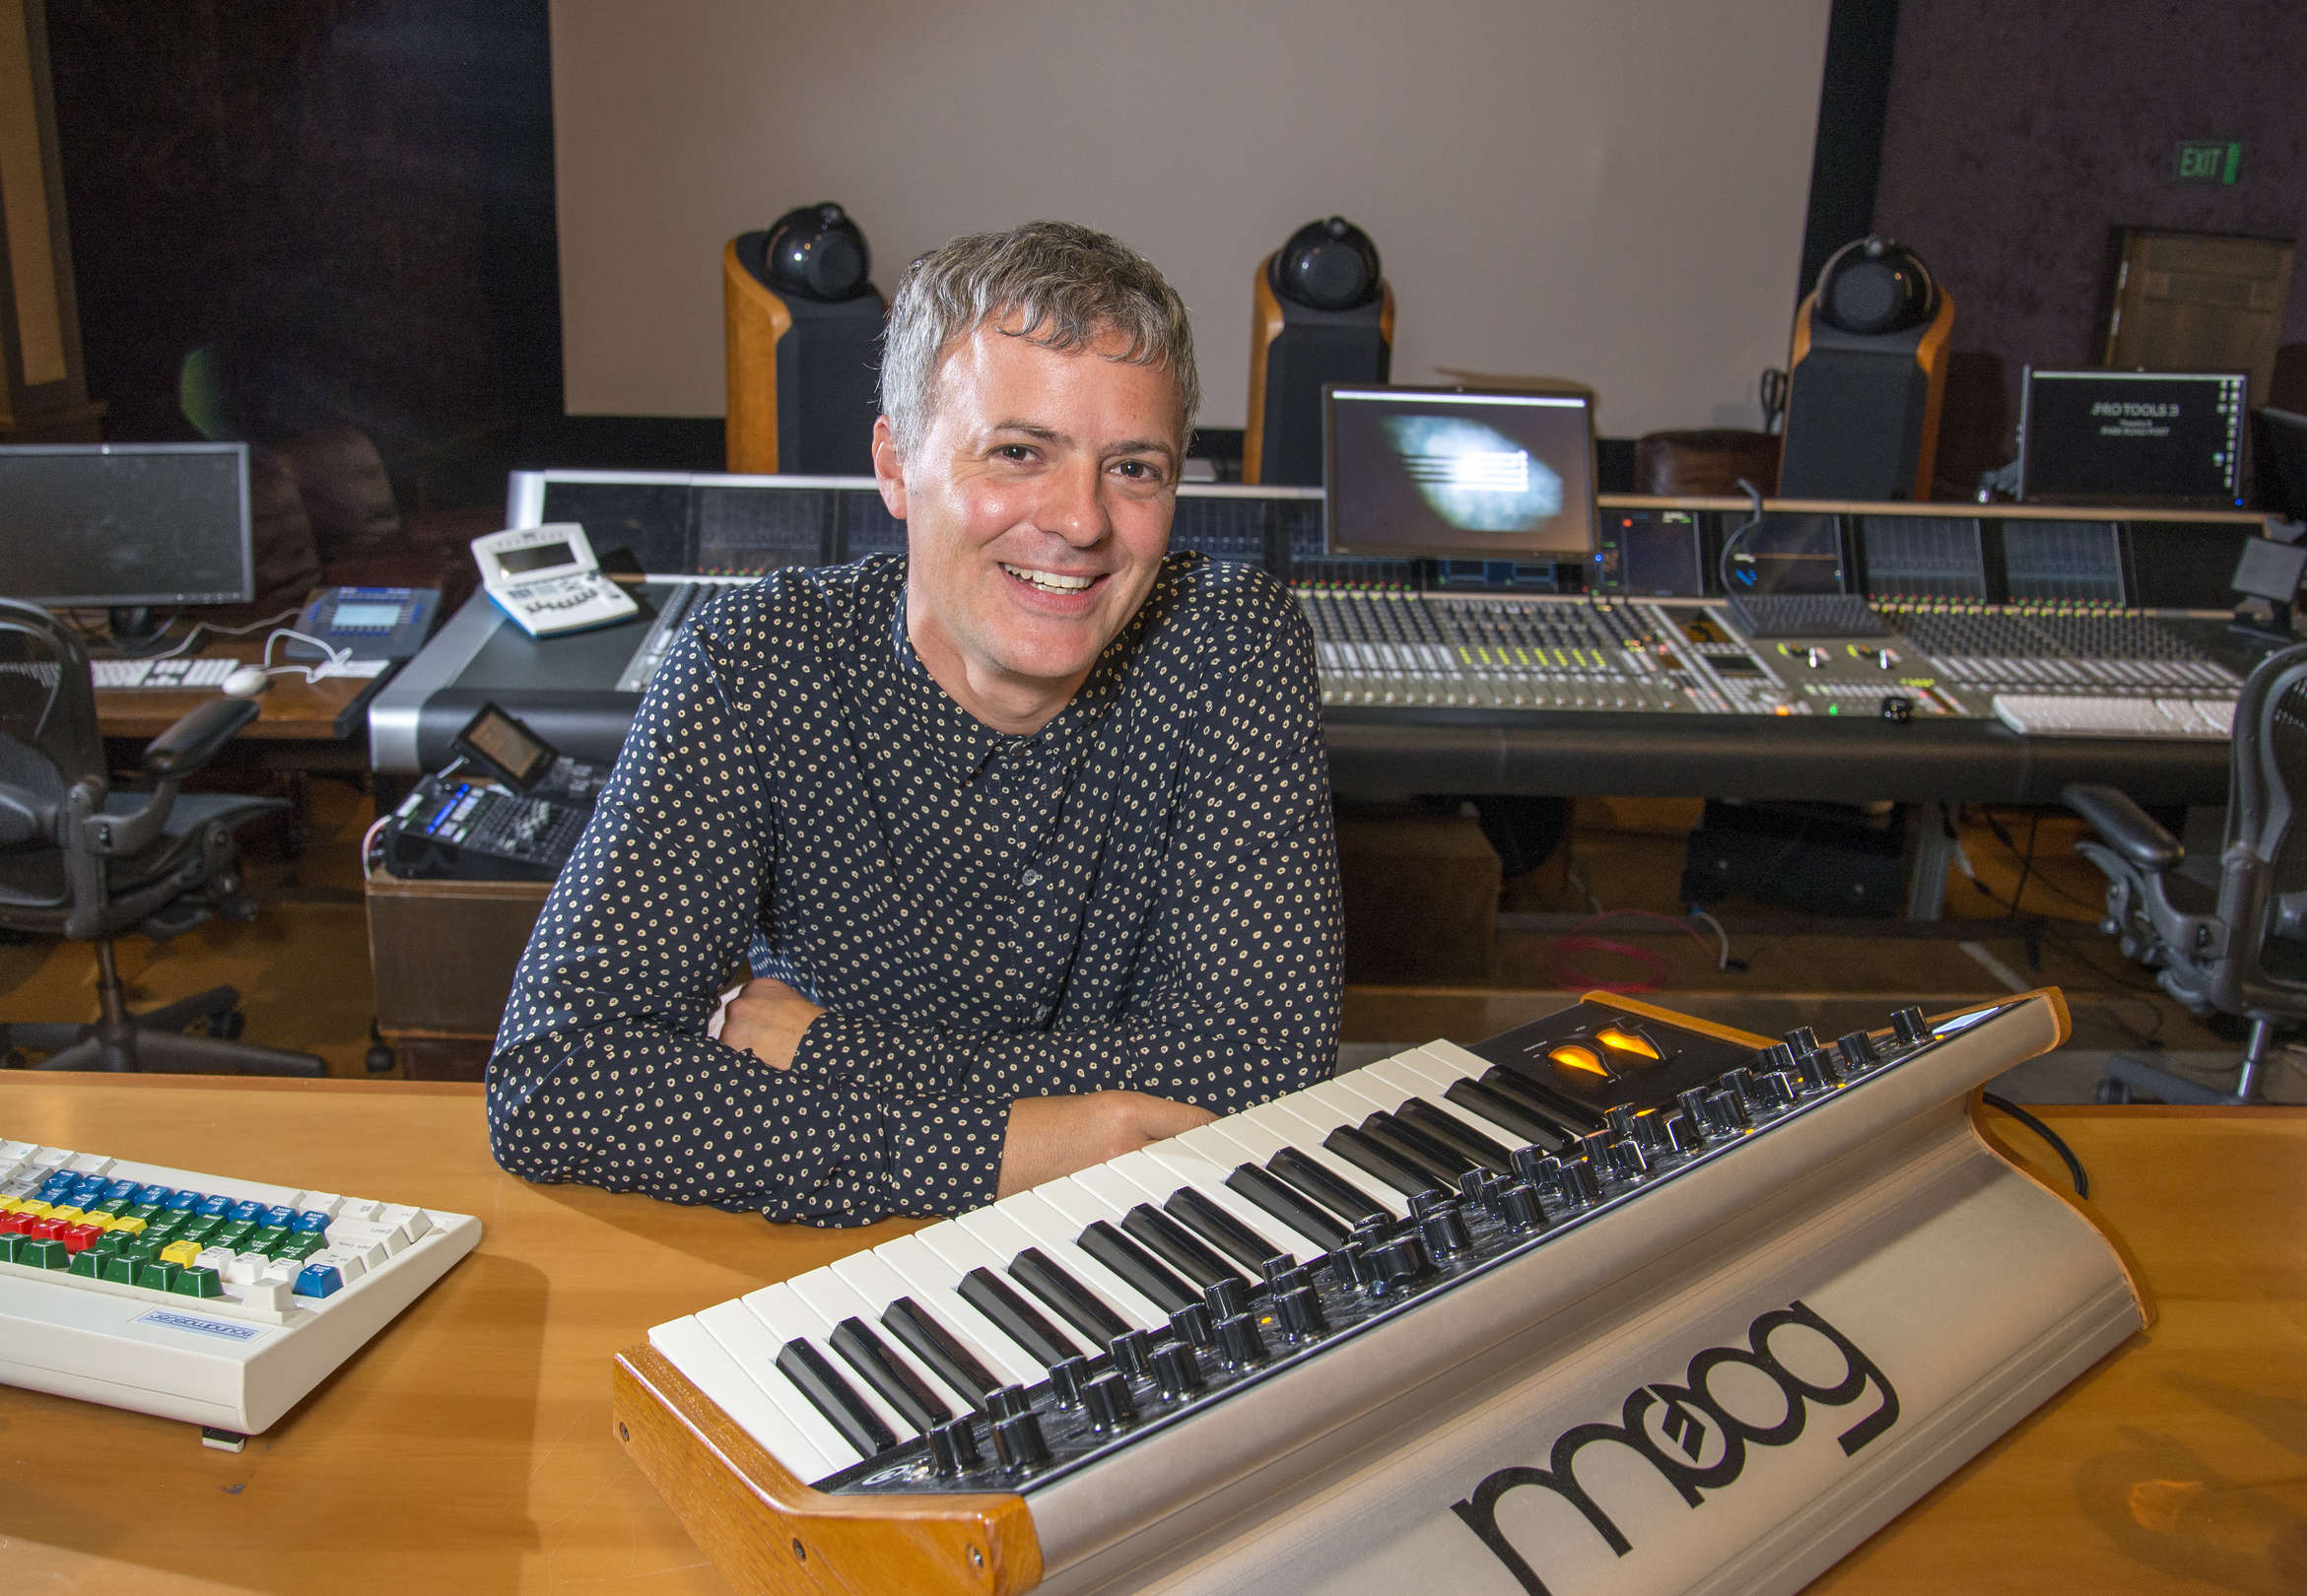 Meet Stephen Gallagher: composer and music producer on She Shears